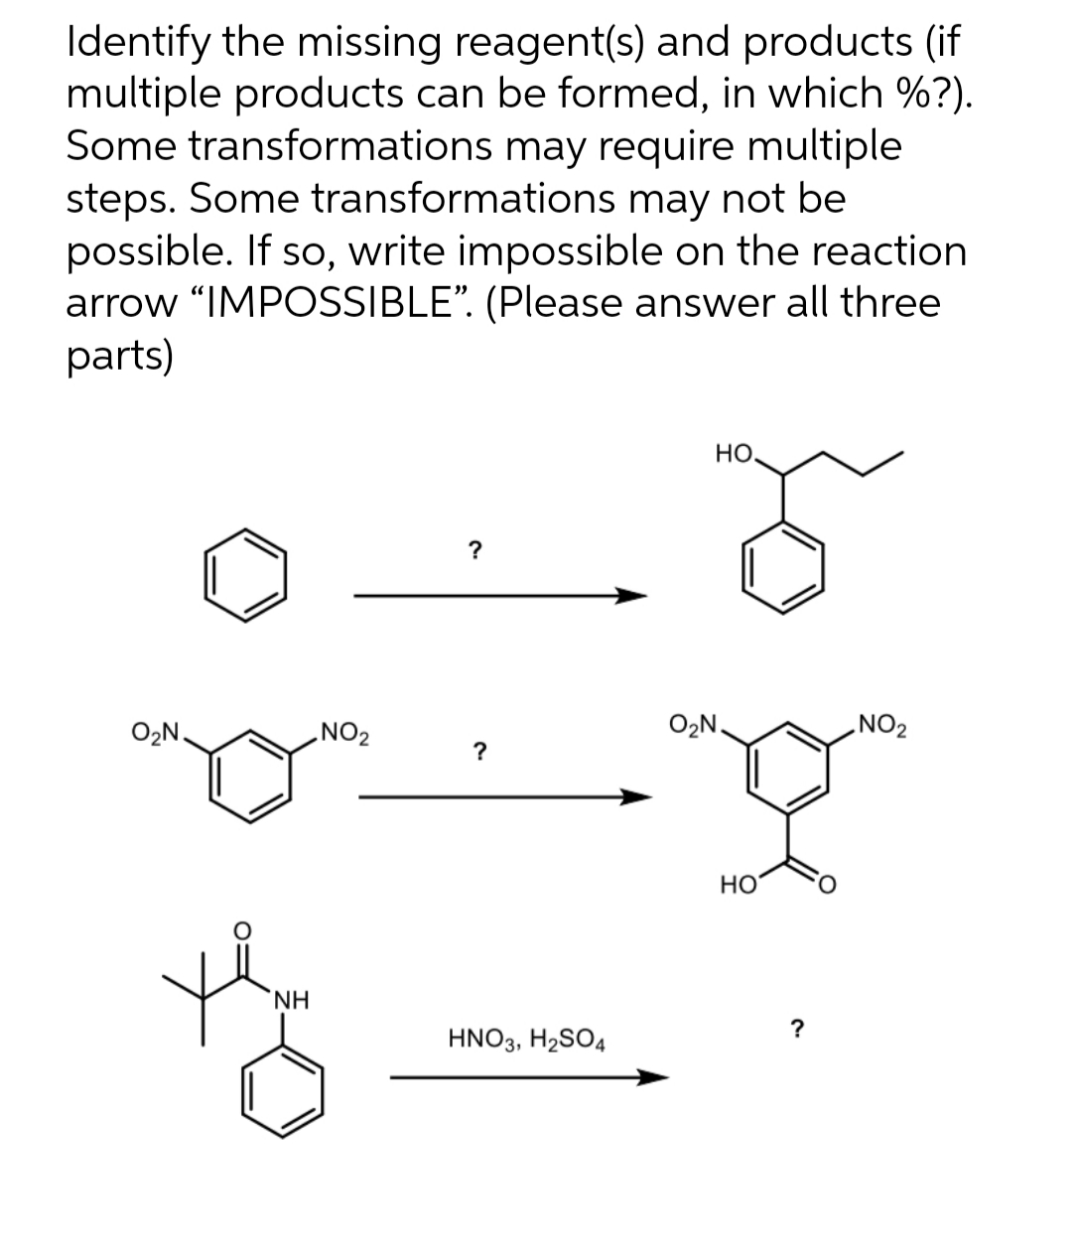 Identify the missing reagent(s) and products (if
multiple products can be formed, in which %?).
Some transformations may require multiple
steps. Some transformations may not be
possible. If so, write impossible on the reaction
arrow "IMPOSSIBLE". (Please answer all three
parts)
O₂N.
ΝΗ
NO₂
?
HNO3, H₂SO4
но.
O₂N.
HO
?
NO₂